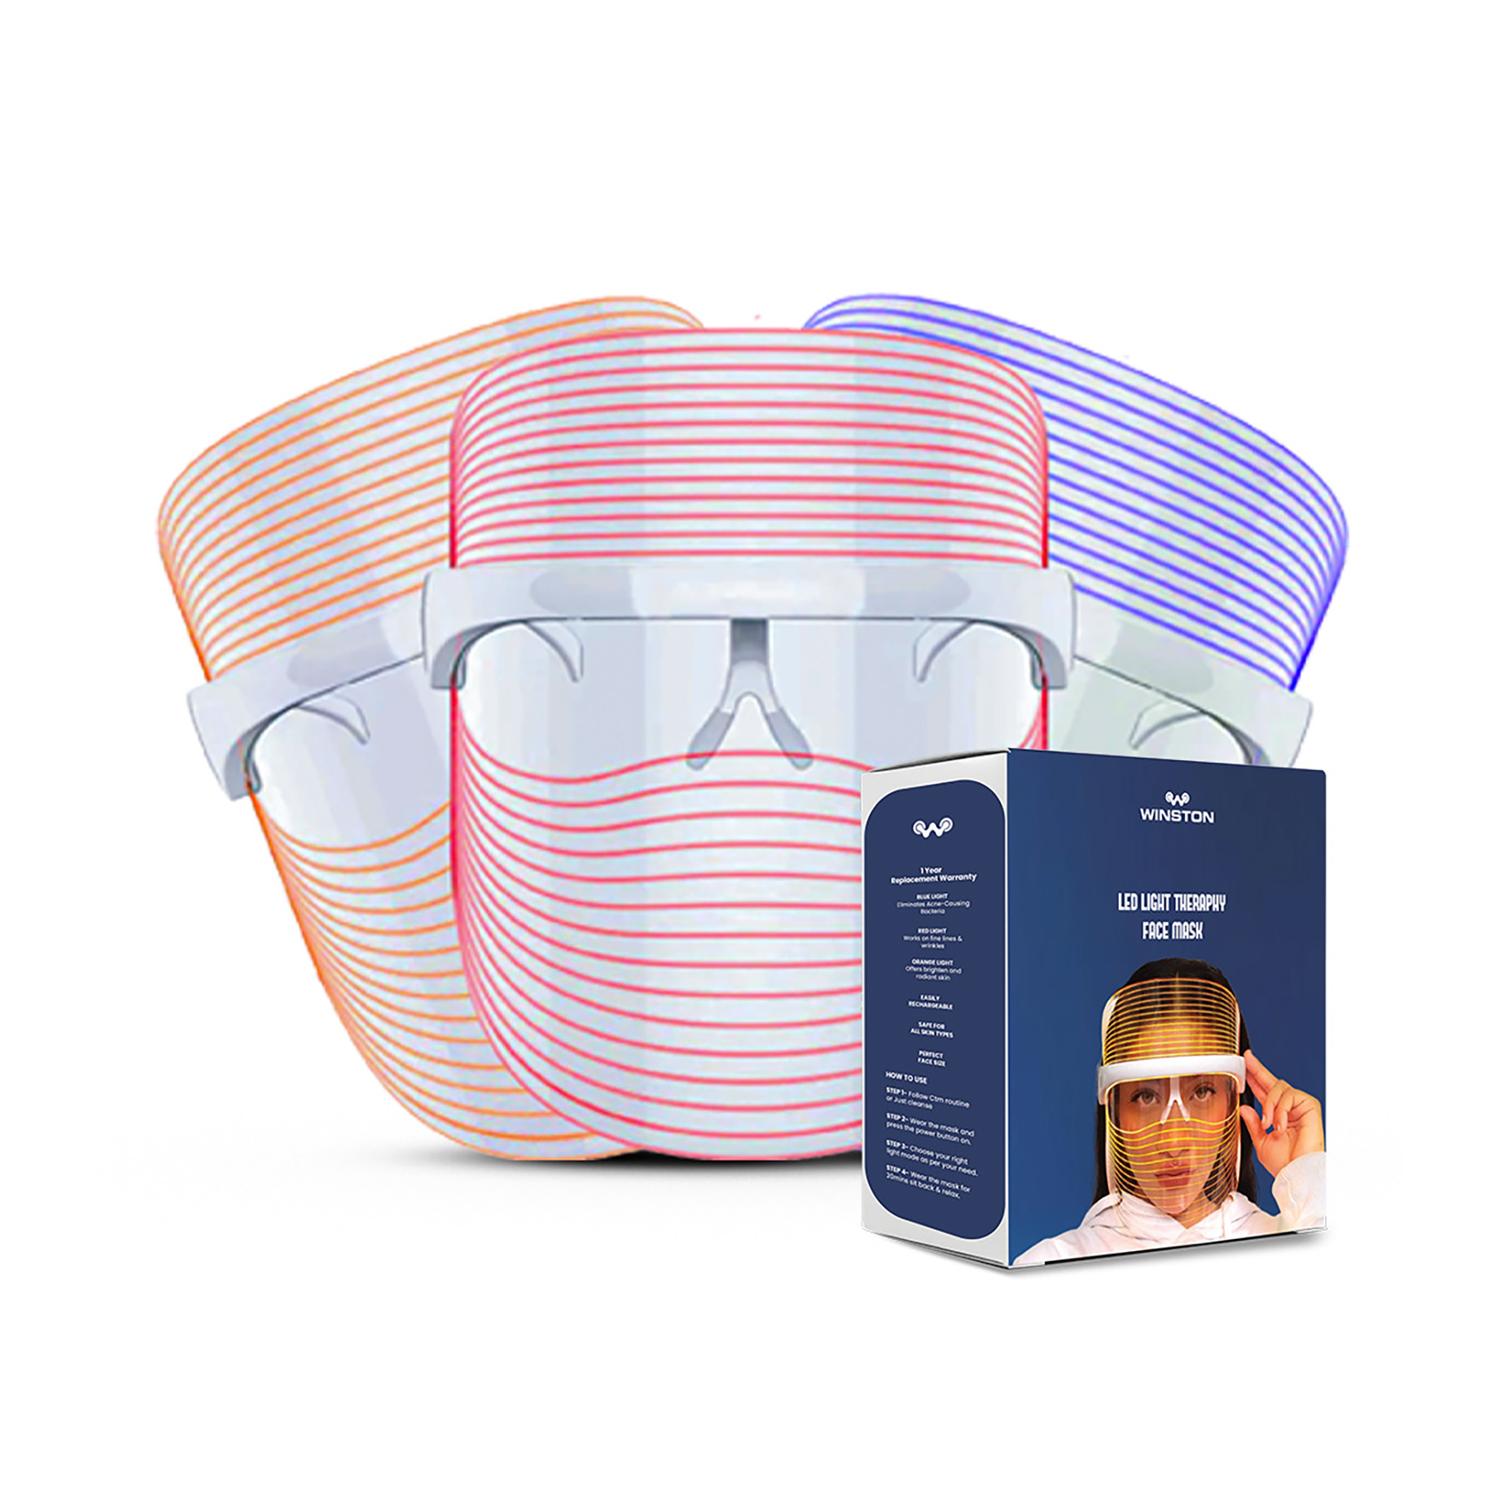 WINSTON | WINSTON 3 In 1 LED Light Therapy Face Mask - White (1Pc)